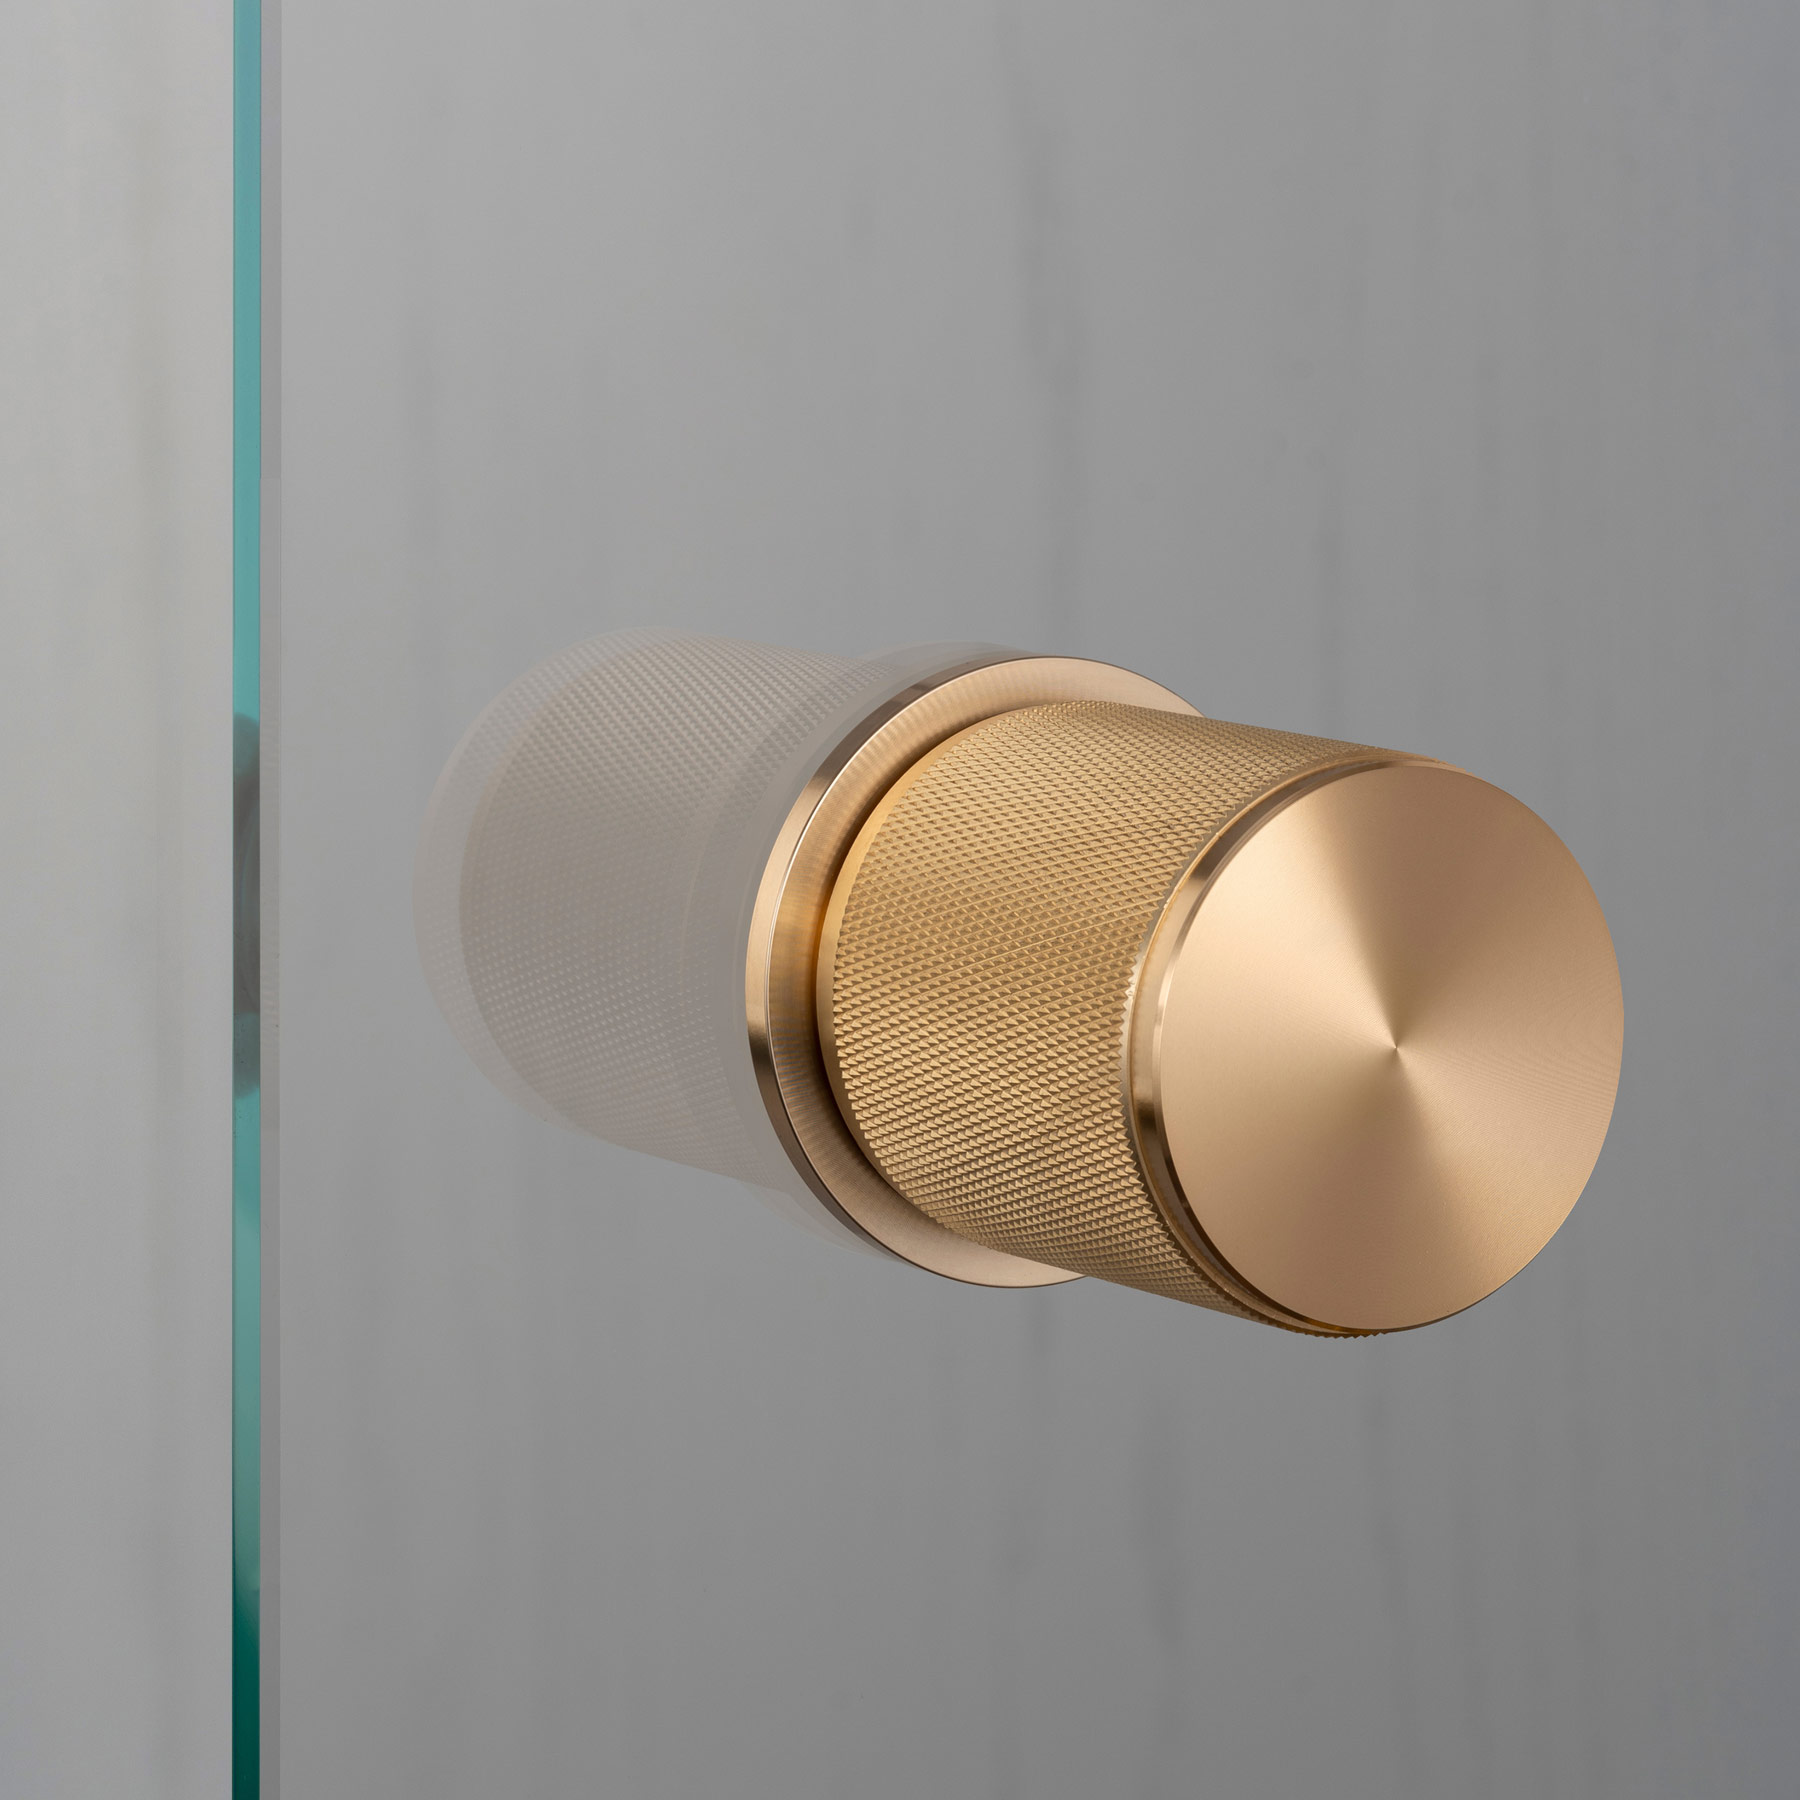 FIXED DOOR HANDLE / SINGLE-SIDED / CROSS / BRASS - Buster + Punch